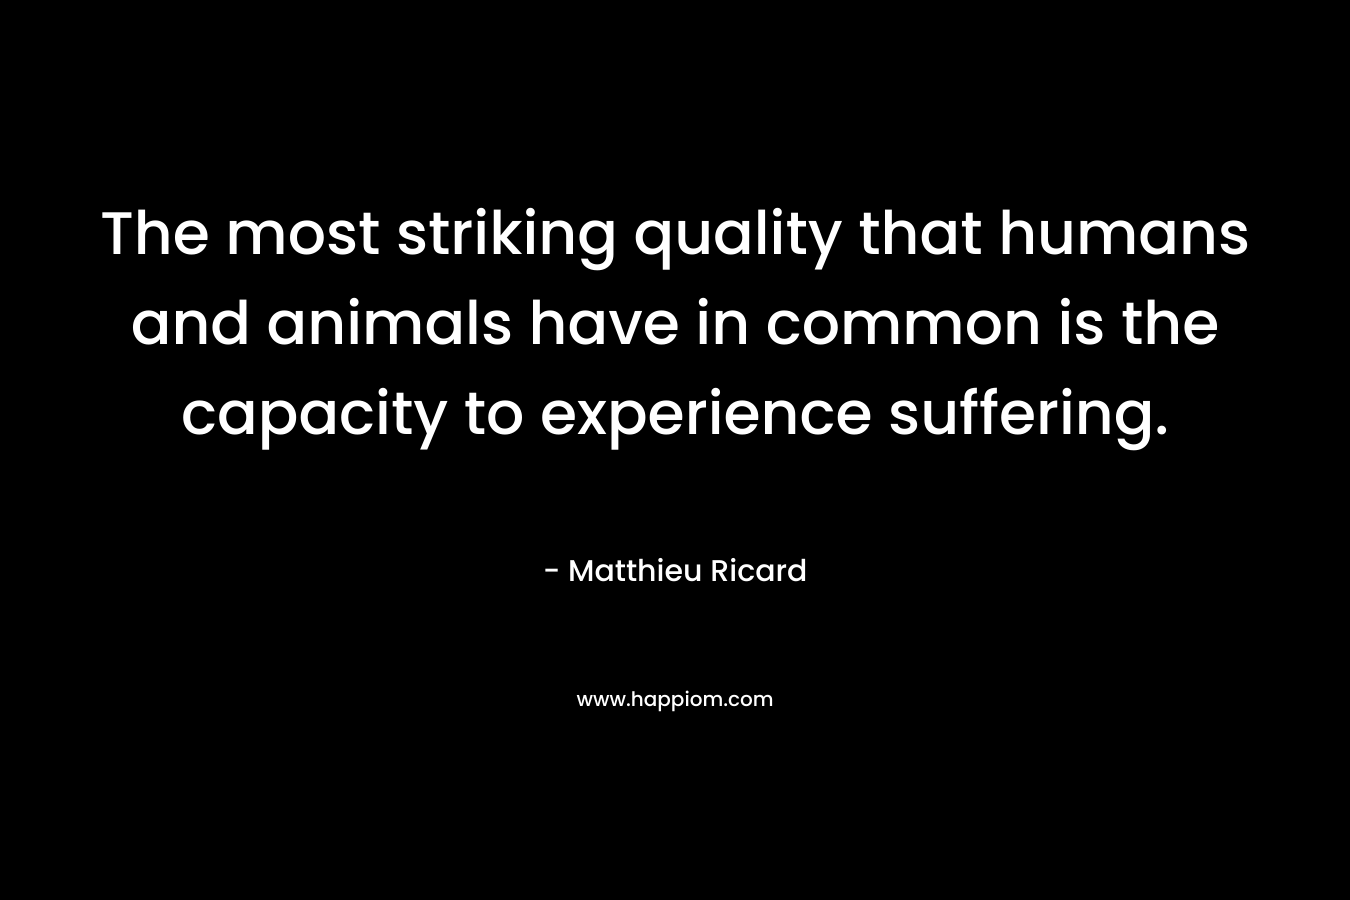 The most striking quality that humans and animals have in common is the capacity to experience suffering.